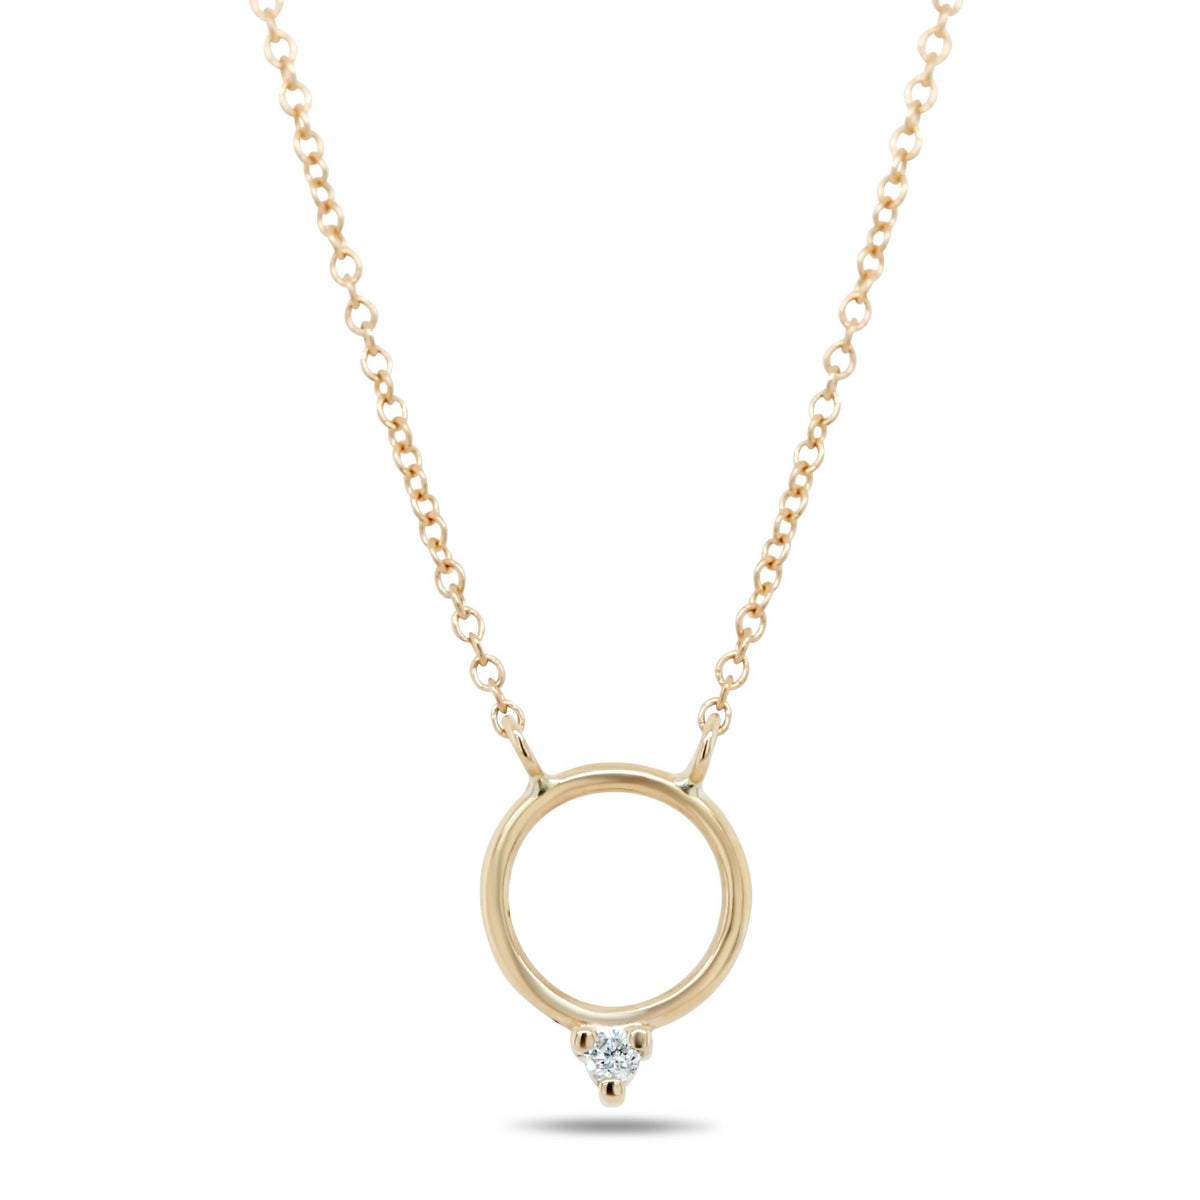 14k yellow gold circle necklace with a dainty diamond on a 16in chain